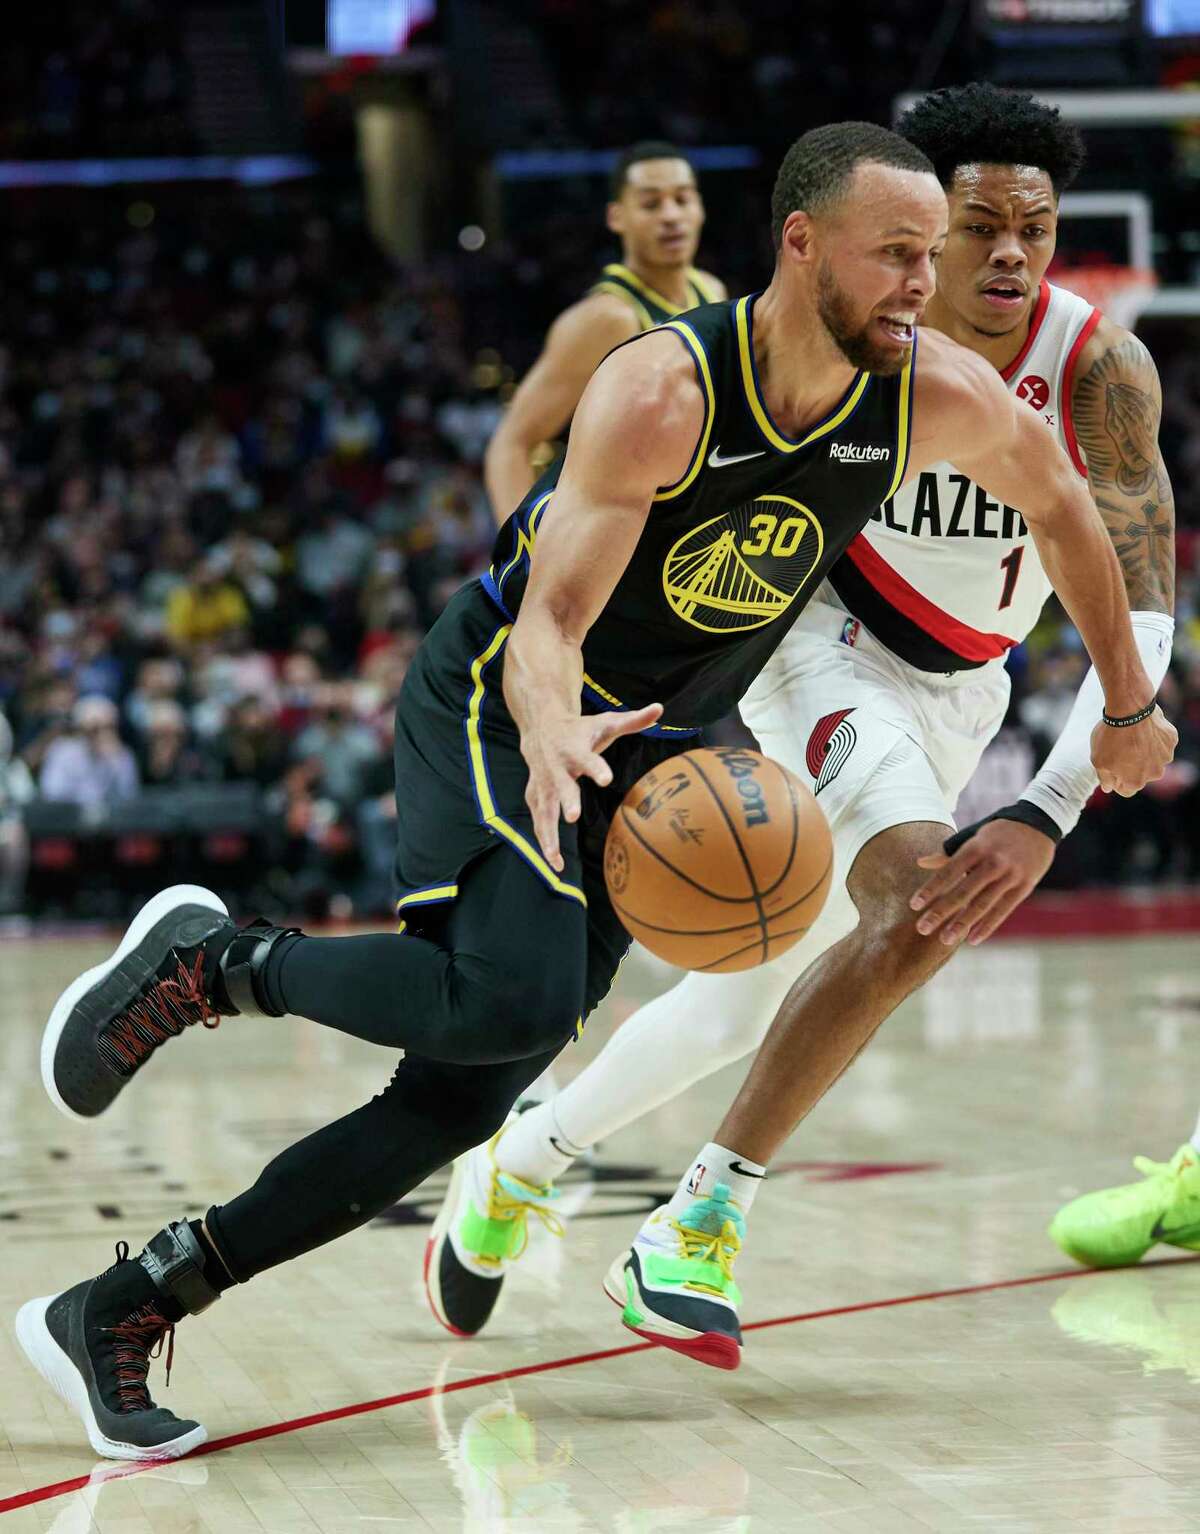 Golden State Warriors guard Stephen Curry, left, dribbles past Portland Trail Blazers guard Anfernee Simons during the first half of an NBA basketball game in Portland, Ore., Thursday, Feb. 24, 2022. (AP Photo/Craig Mitchelldyer)